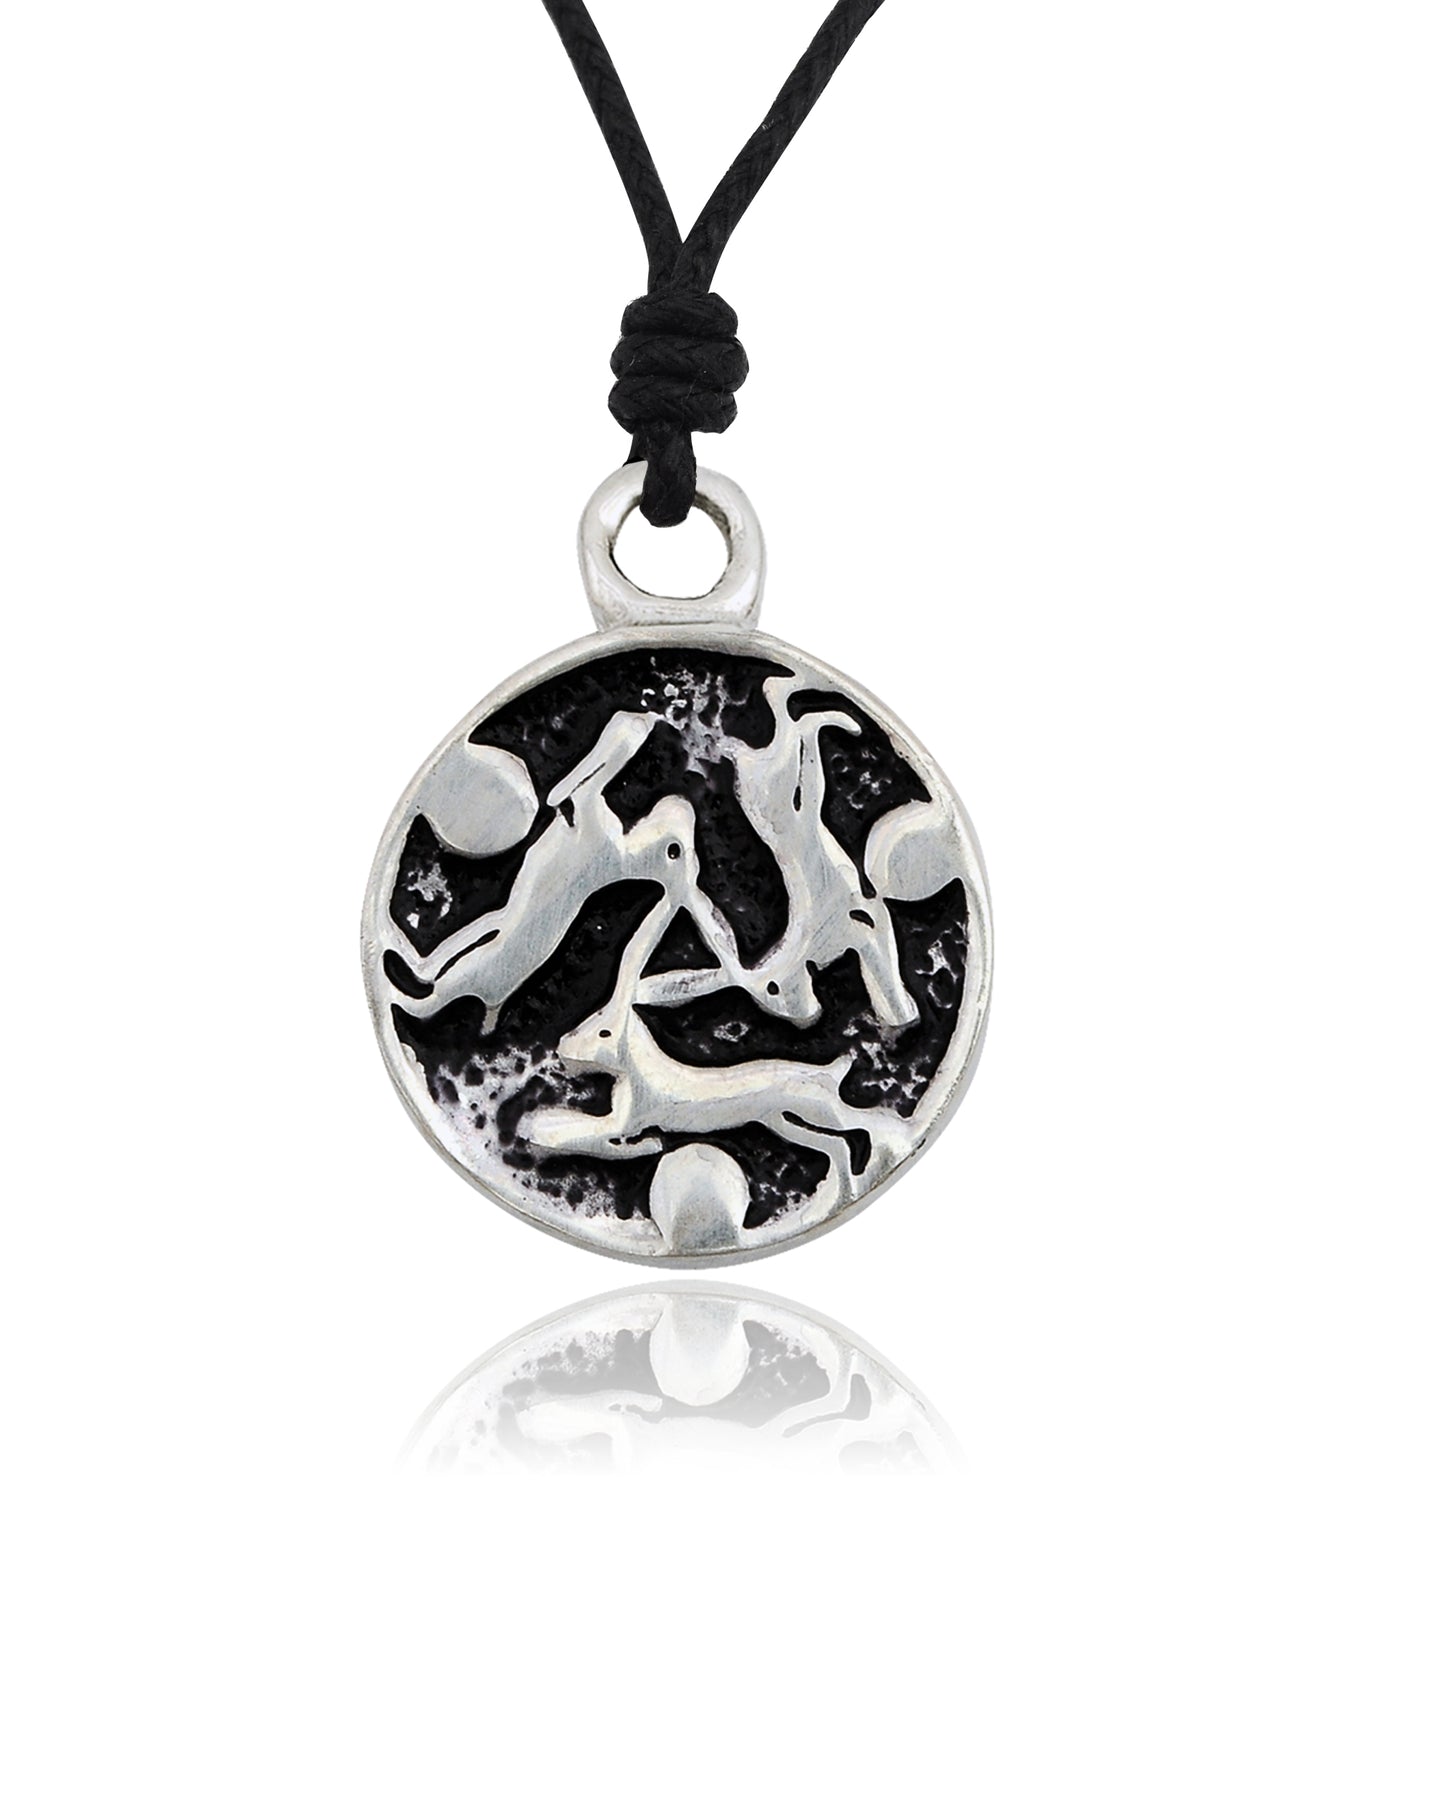 Blue Ranger Design Silver Pewter Charm Necklace Pendant Jewelry